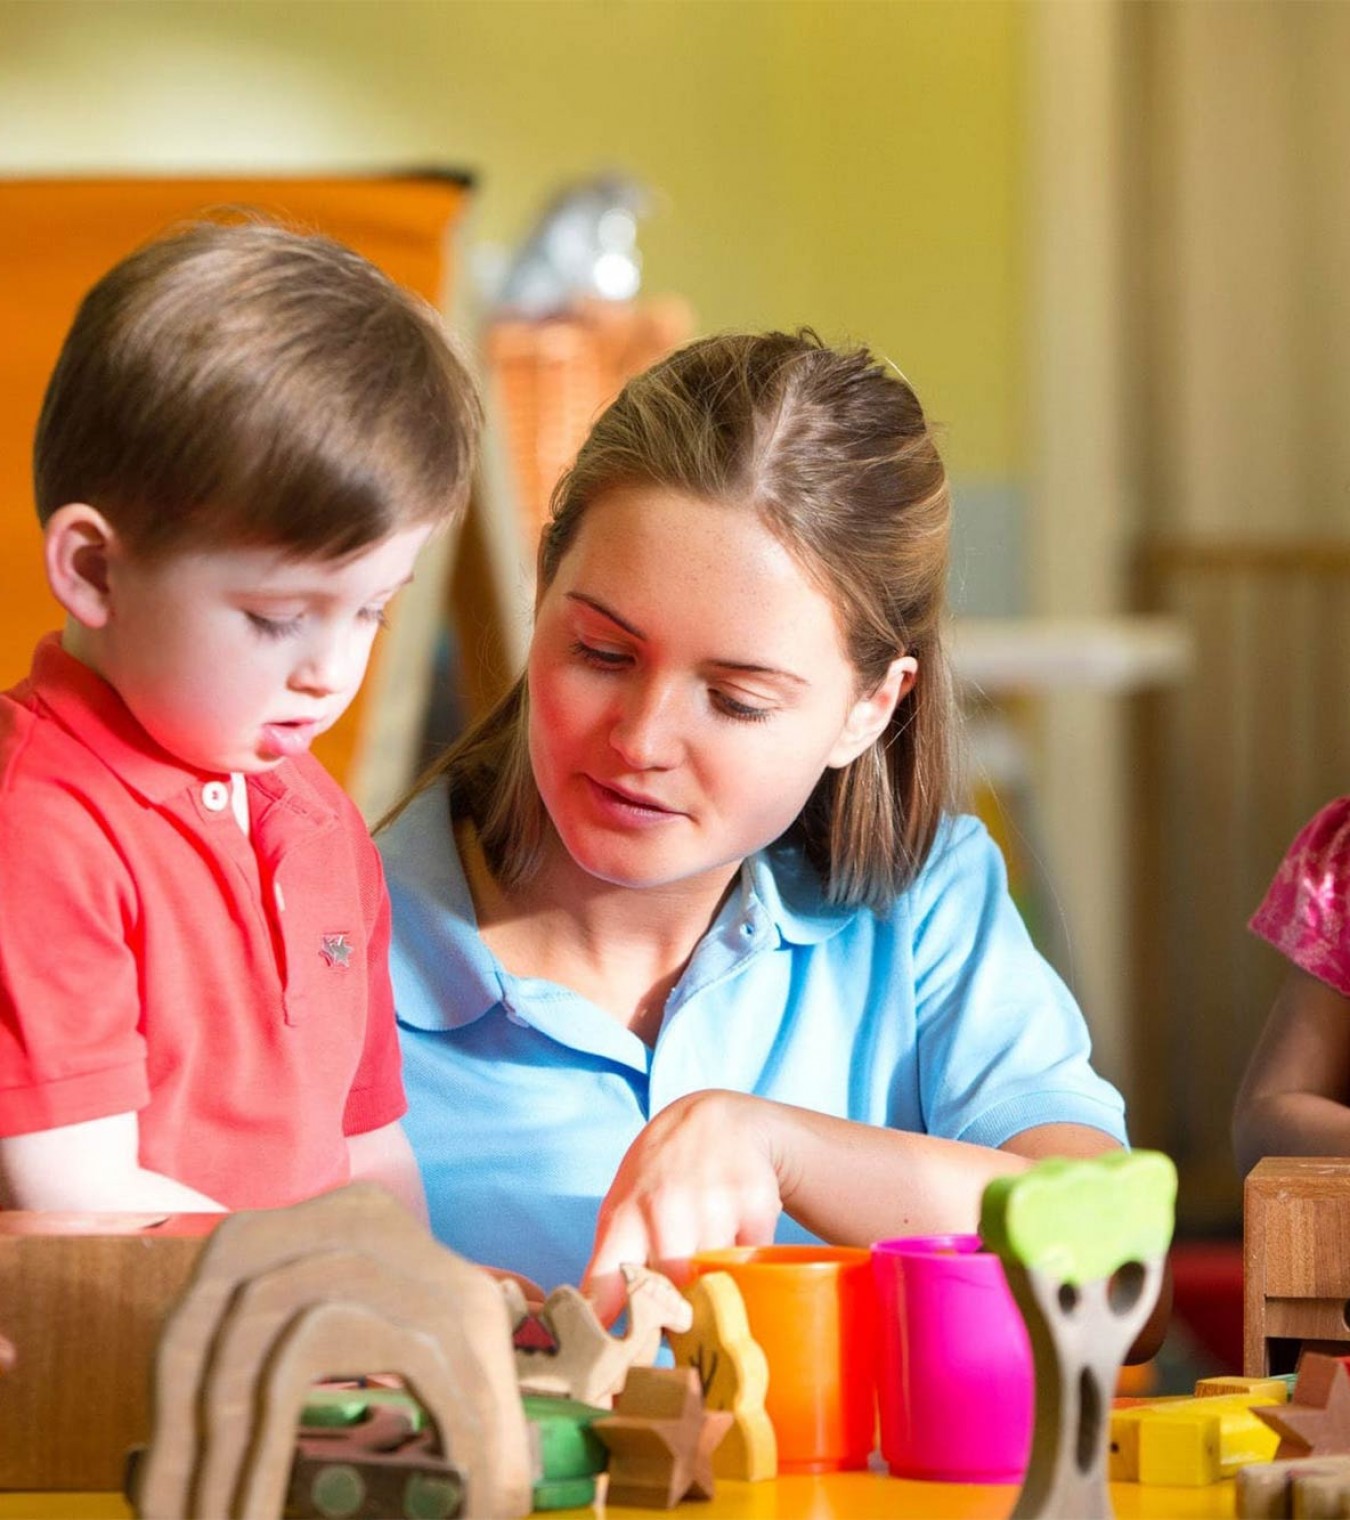 6 Reasons to take part in a childcare apprenticeship